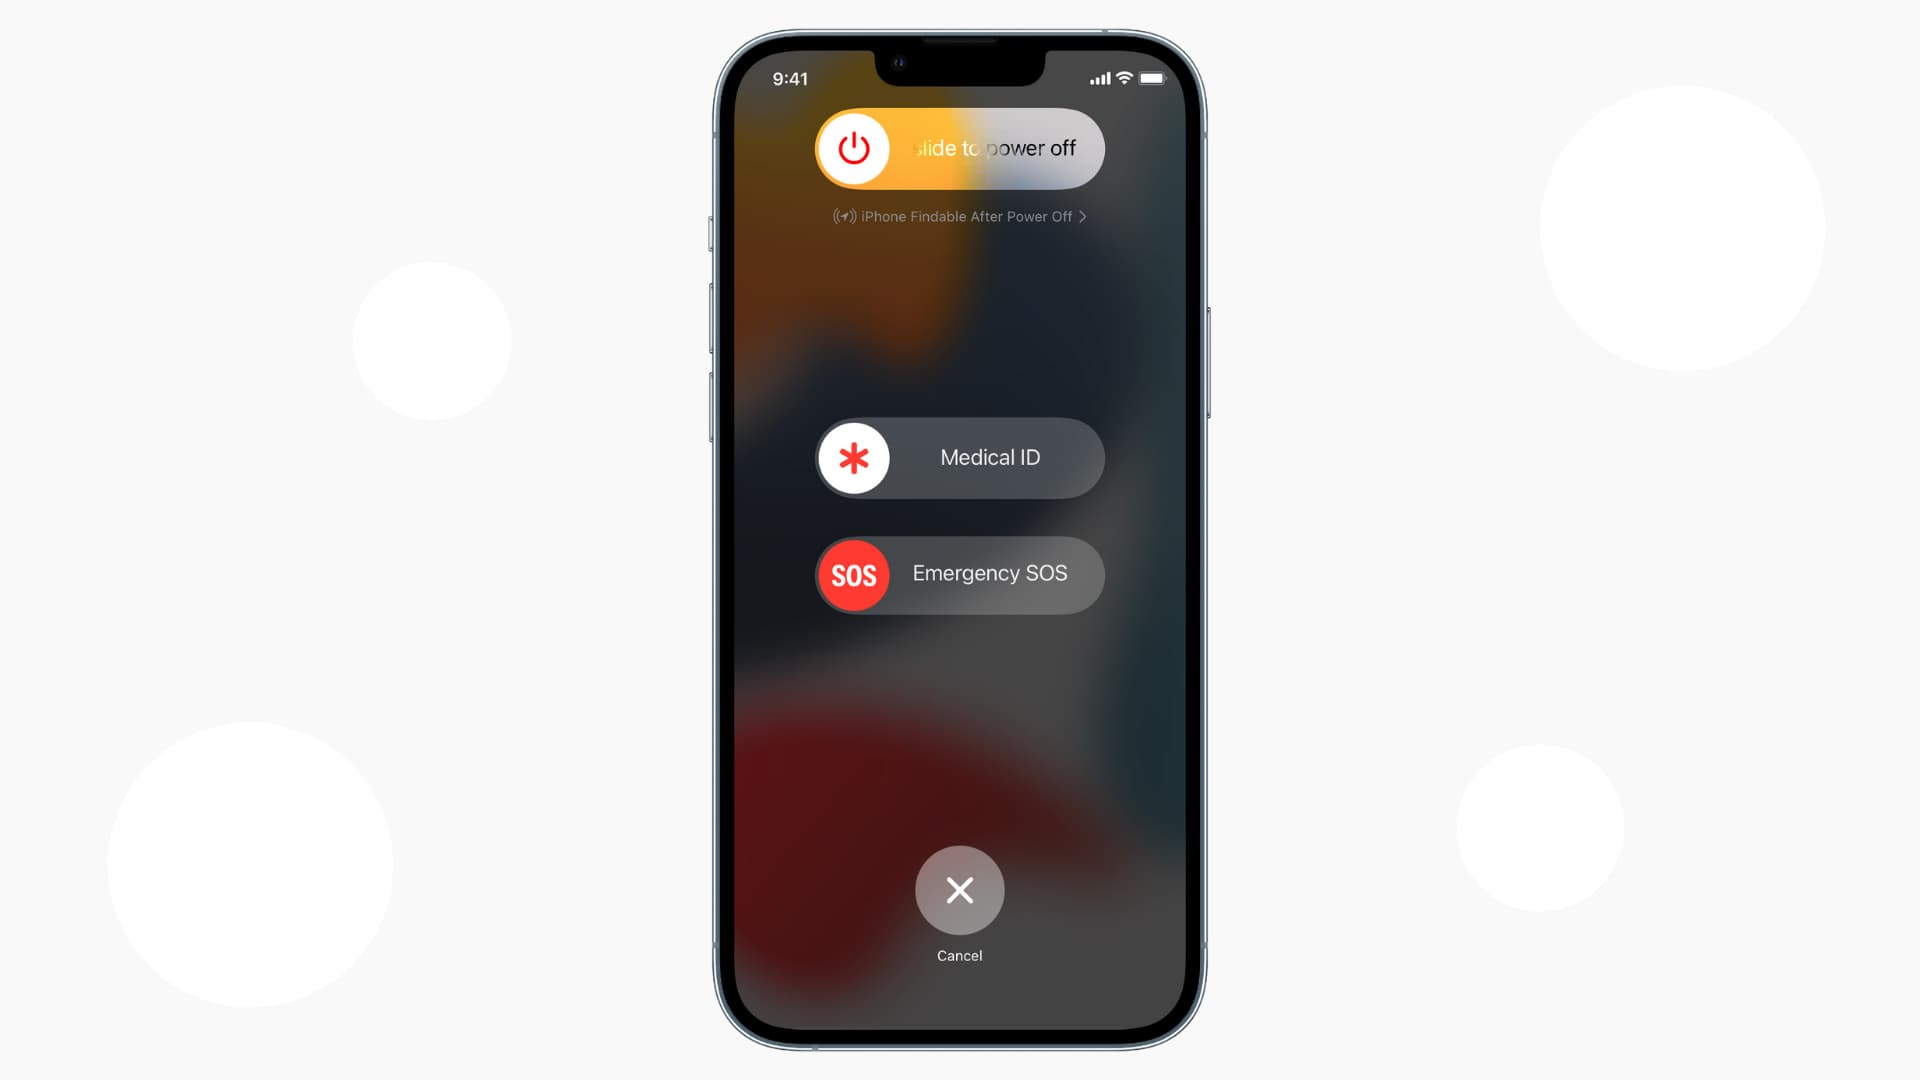 Disconnect your iPhone from the PC.
Turn off your iPhone by pressing and holding the power button until the slider appears.